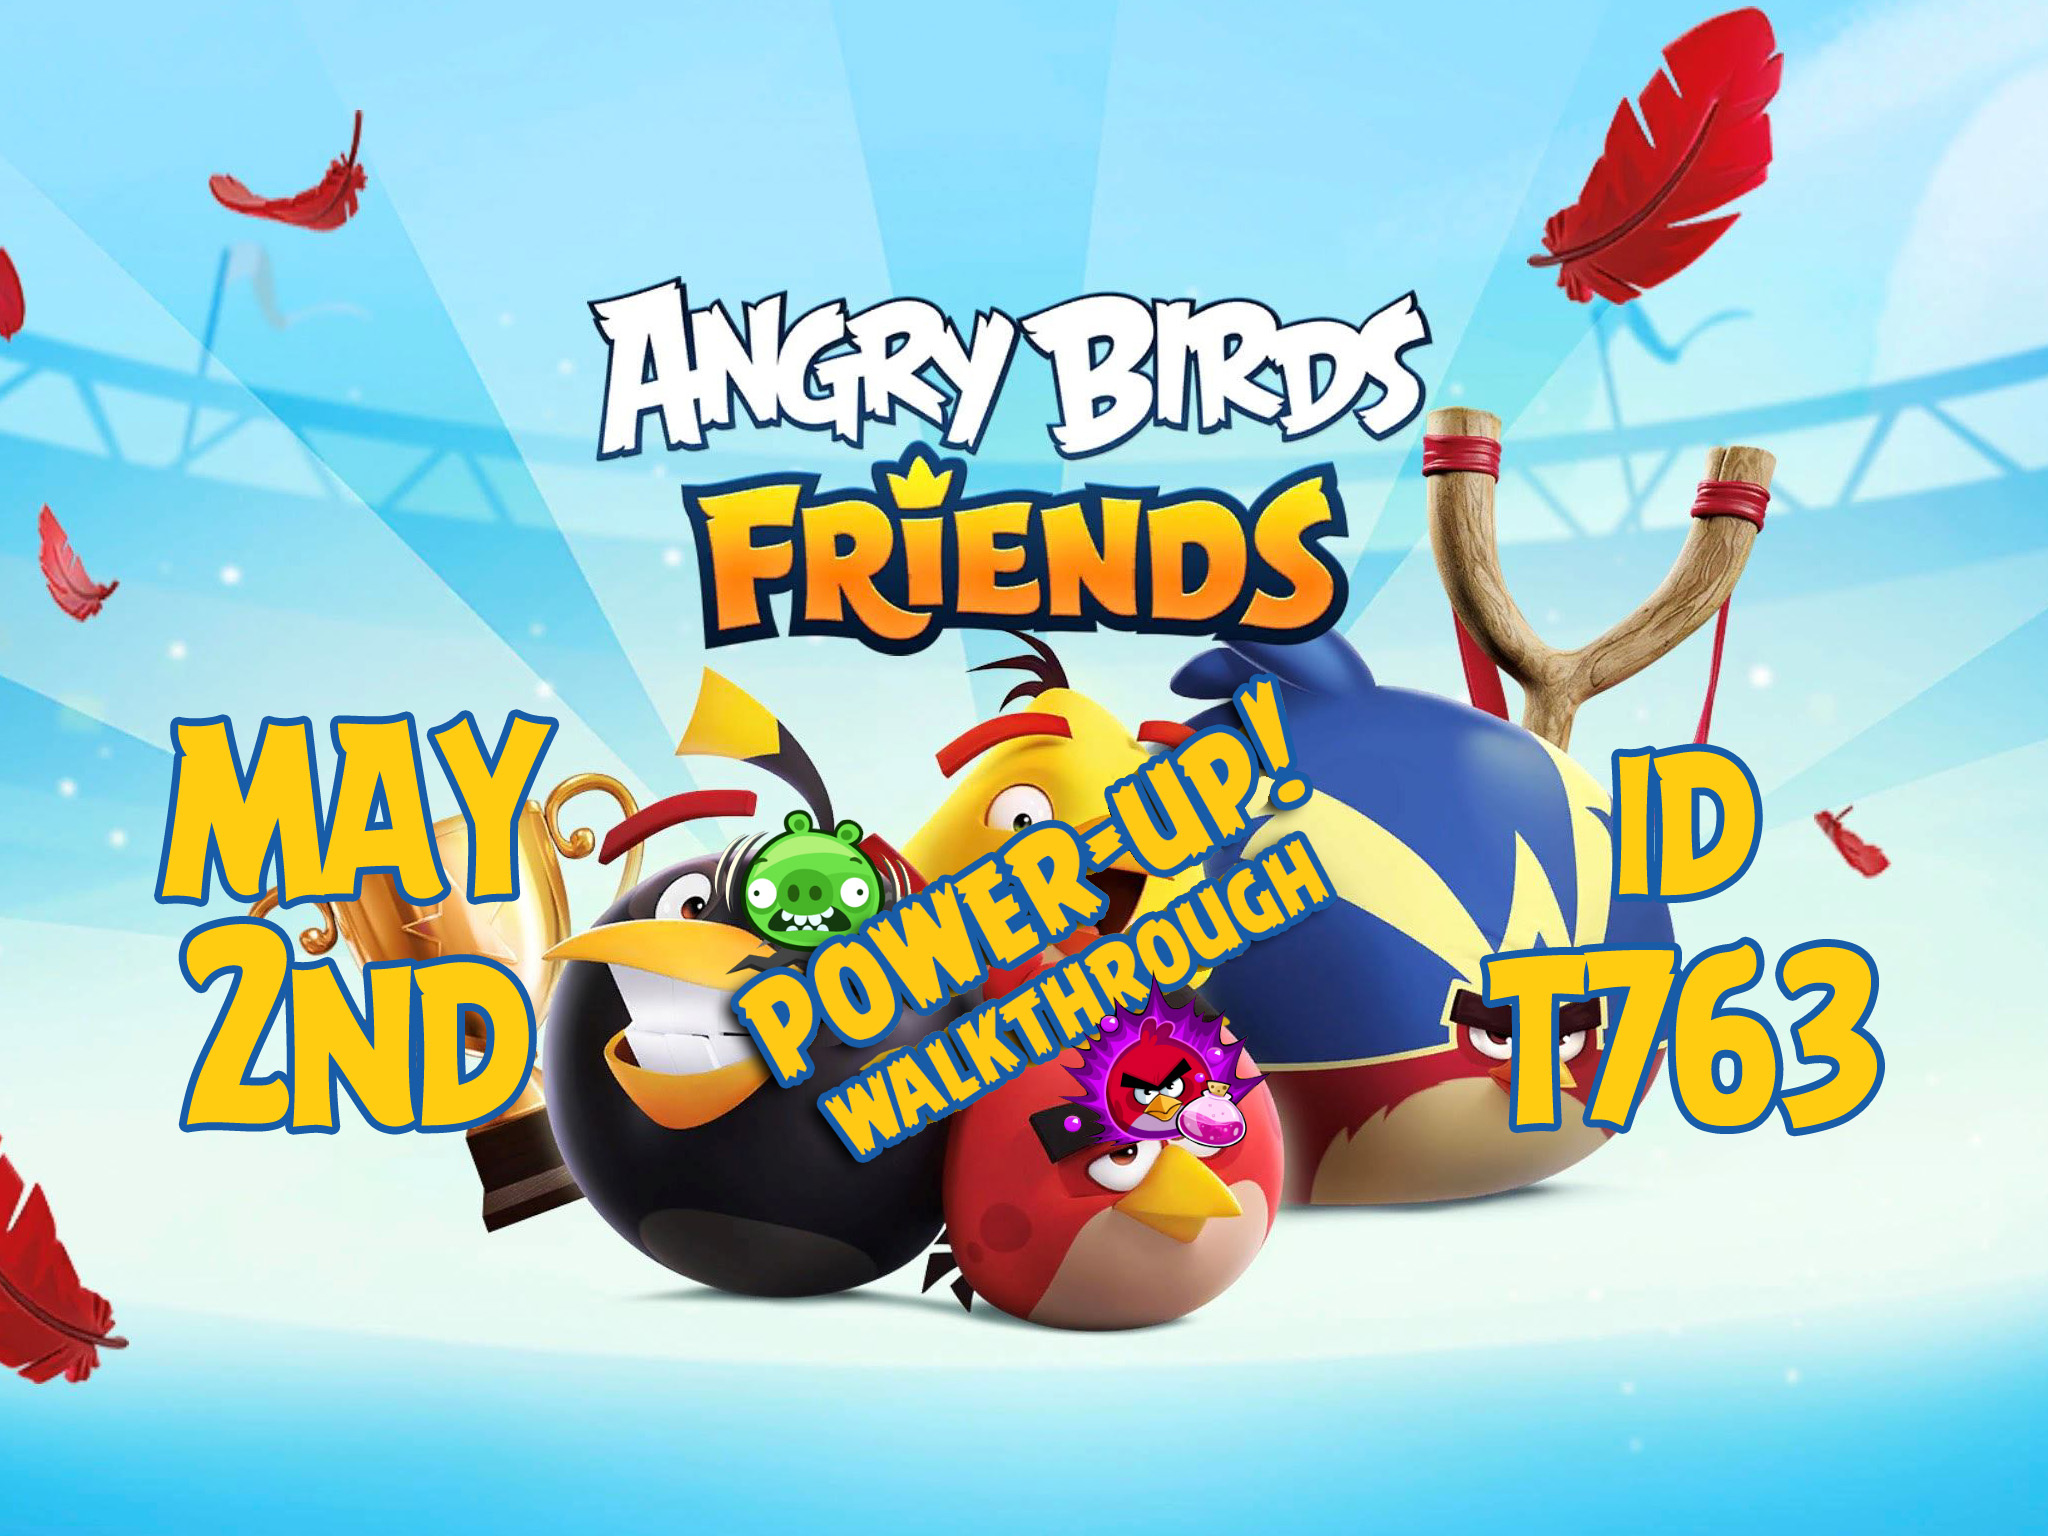 Angry-Birds-Friends-Tournament-T763-Feature-Image-PU